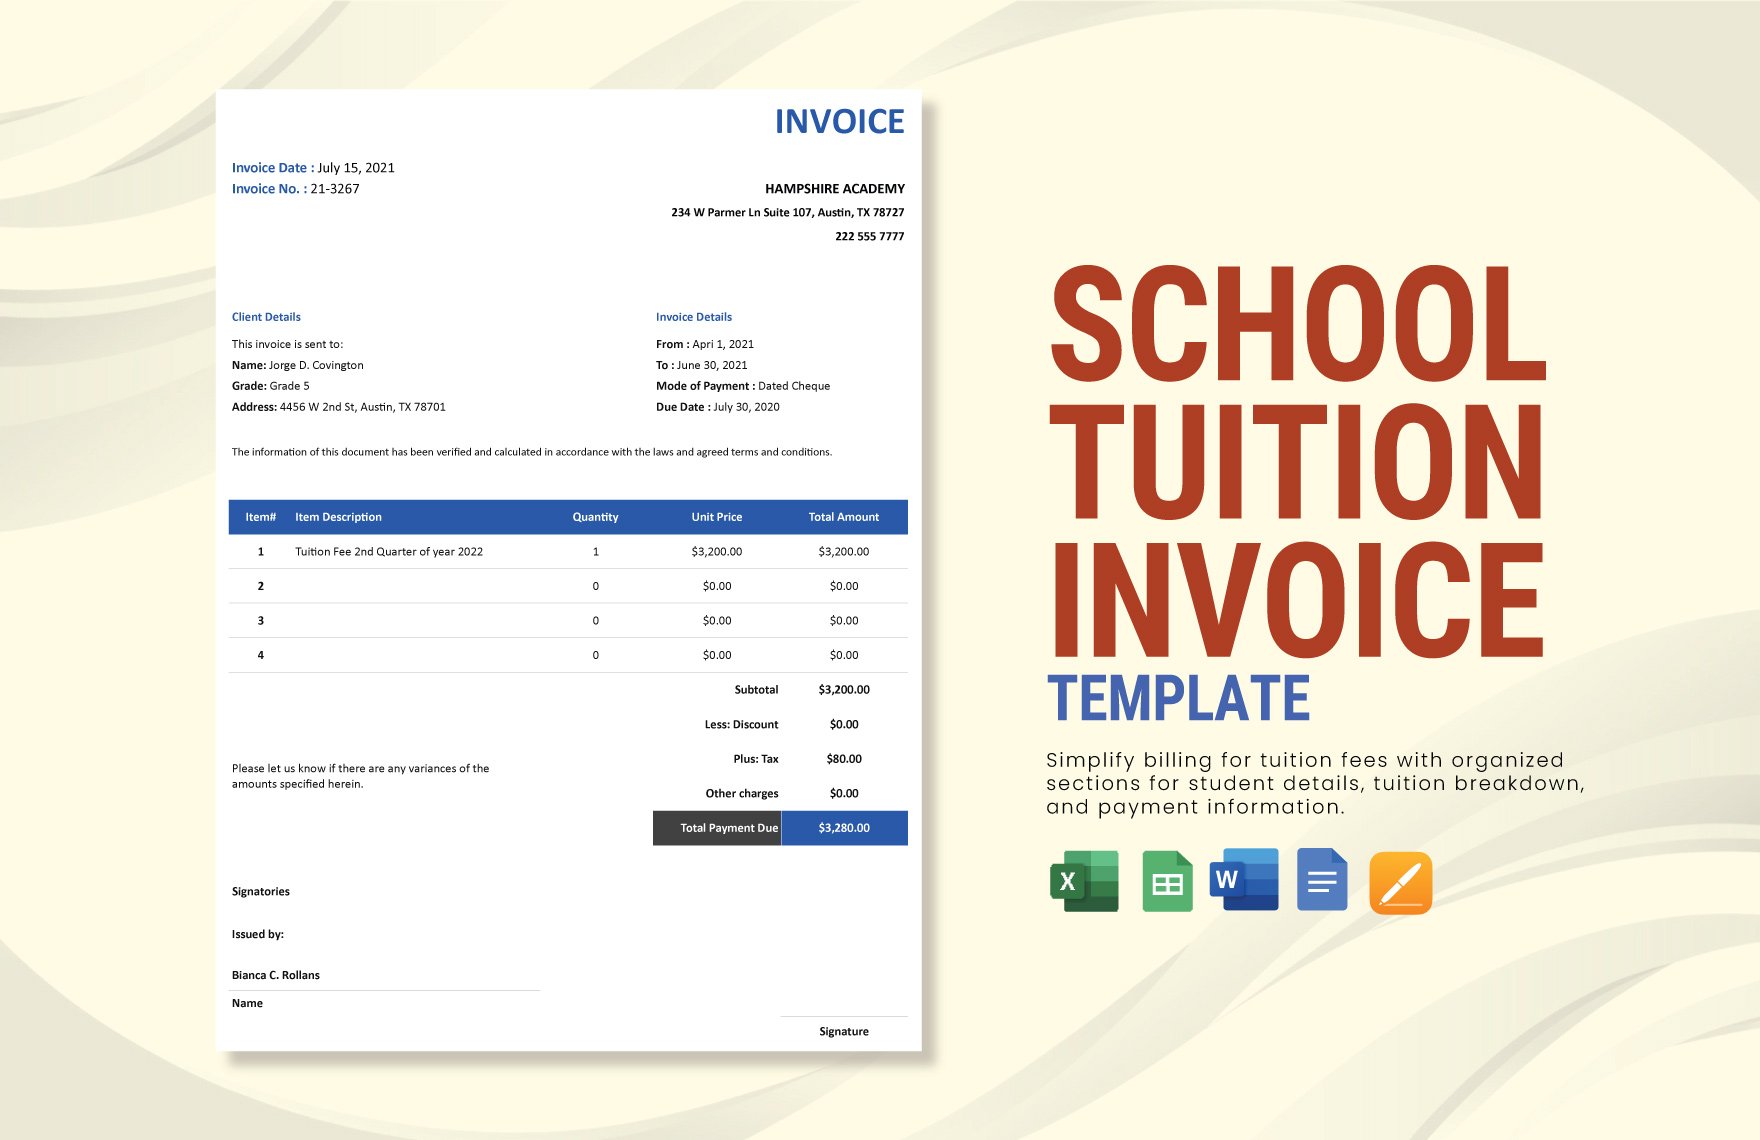 School Tuition Invoice Template in Word, Google Docs, Excel, Google Sheets, Apple Pages